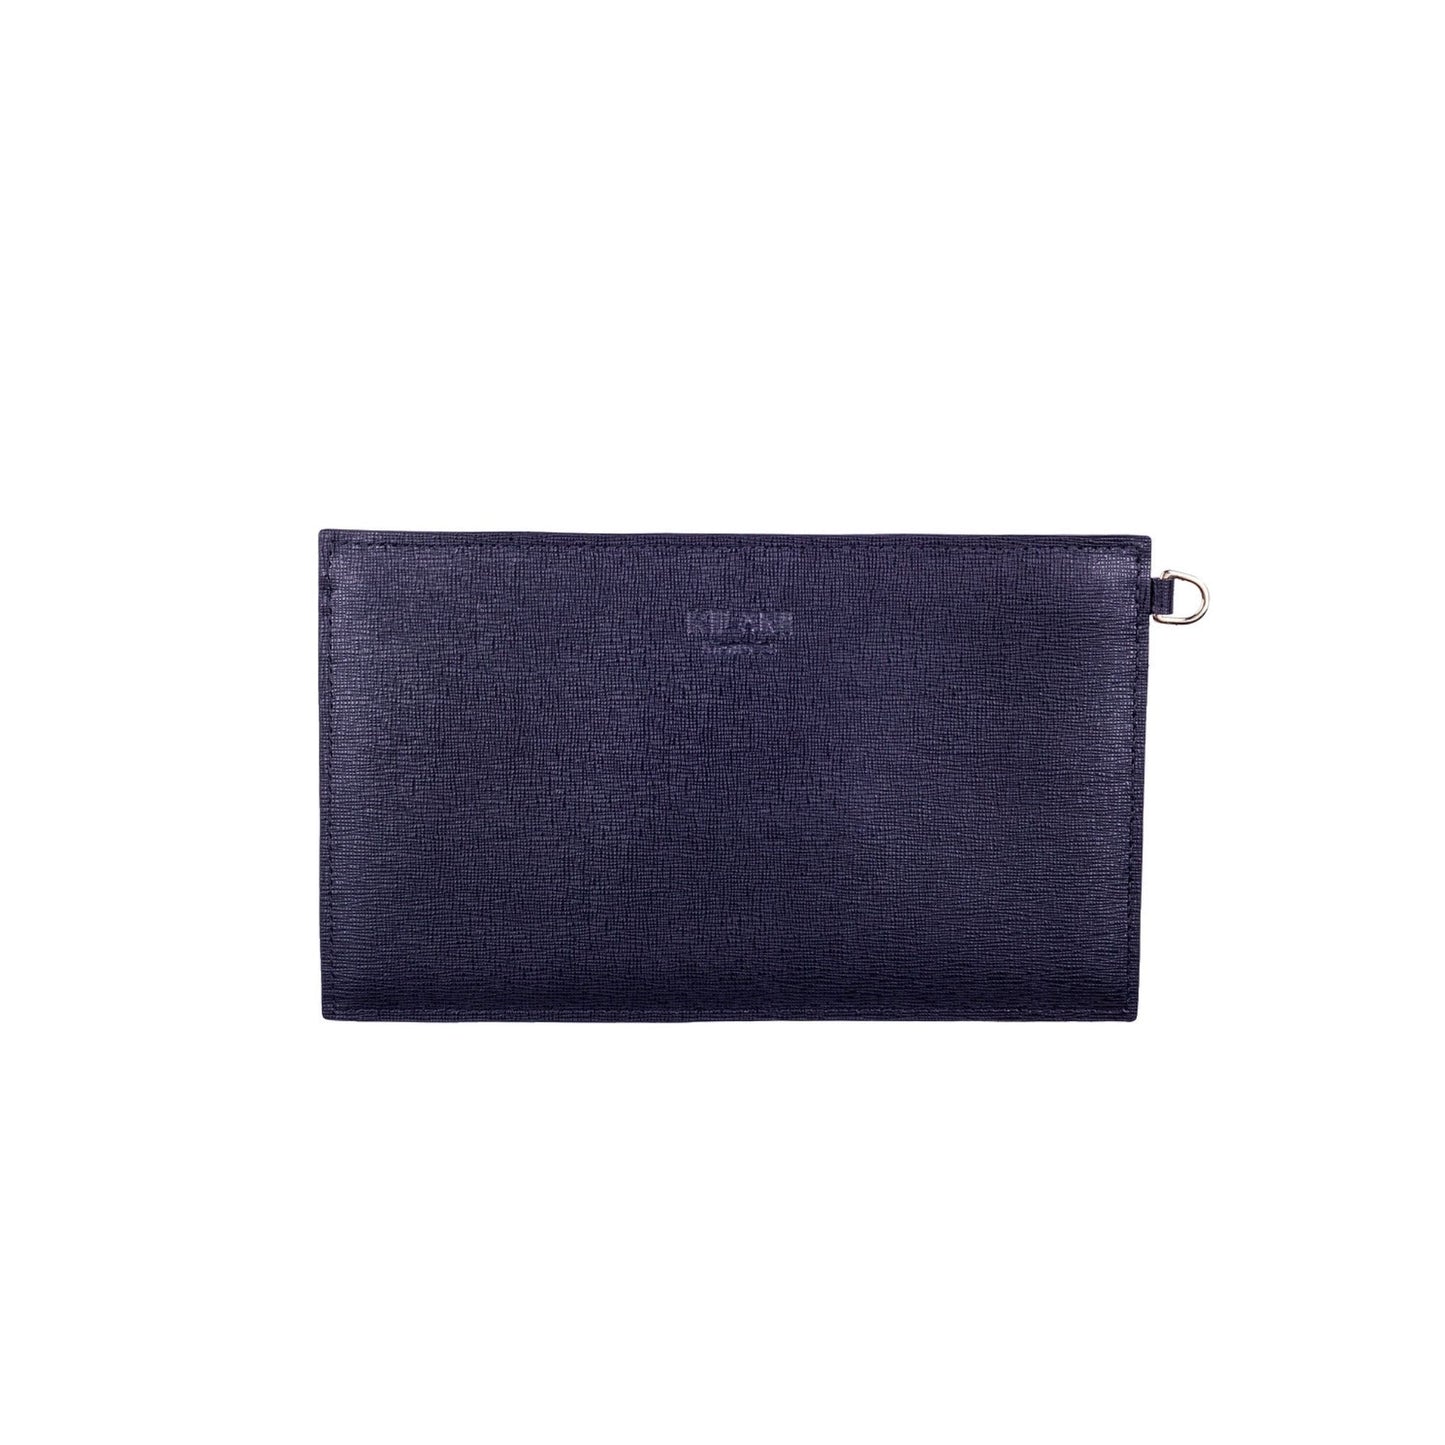 Kilani - Fine Genuine Leather Clutch | Made in Montreal